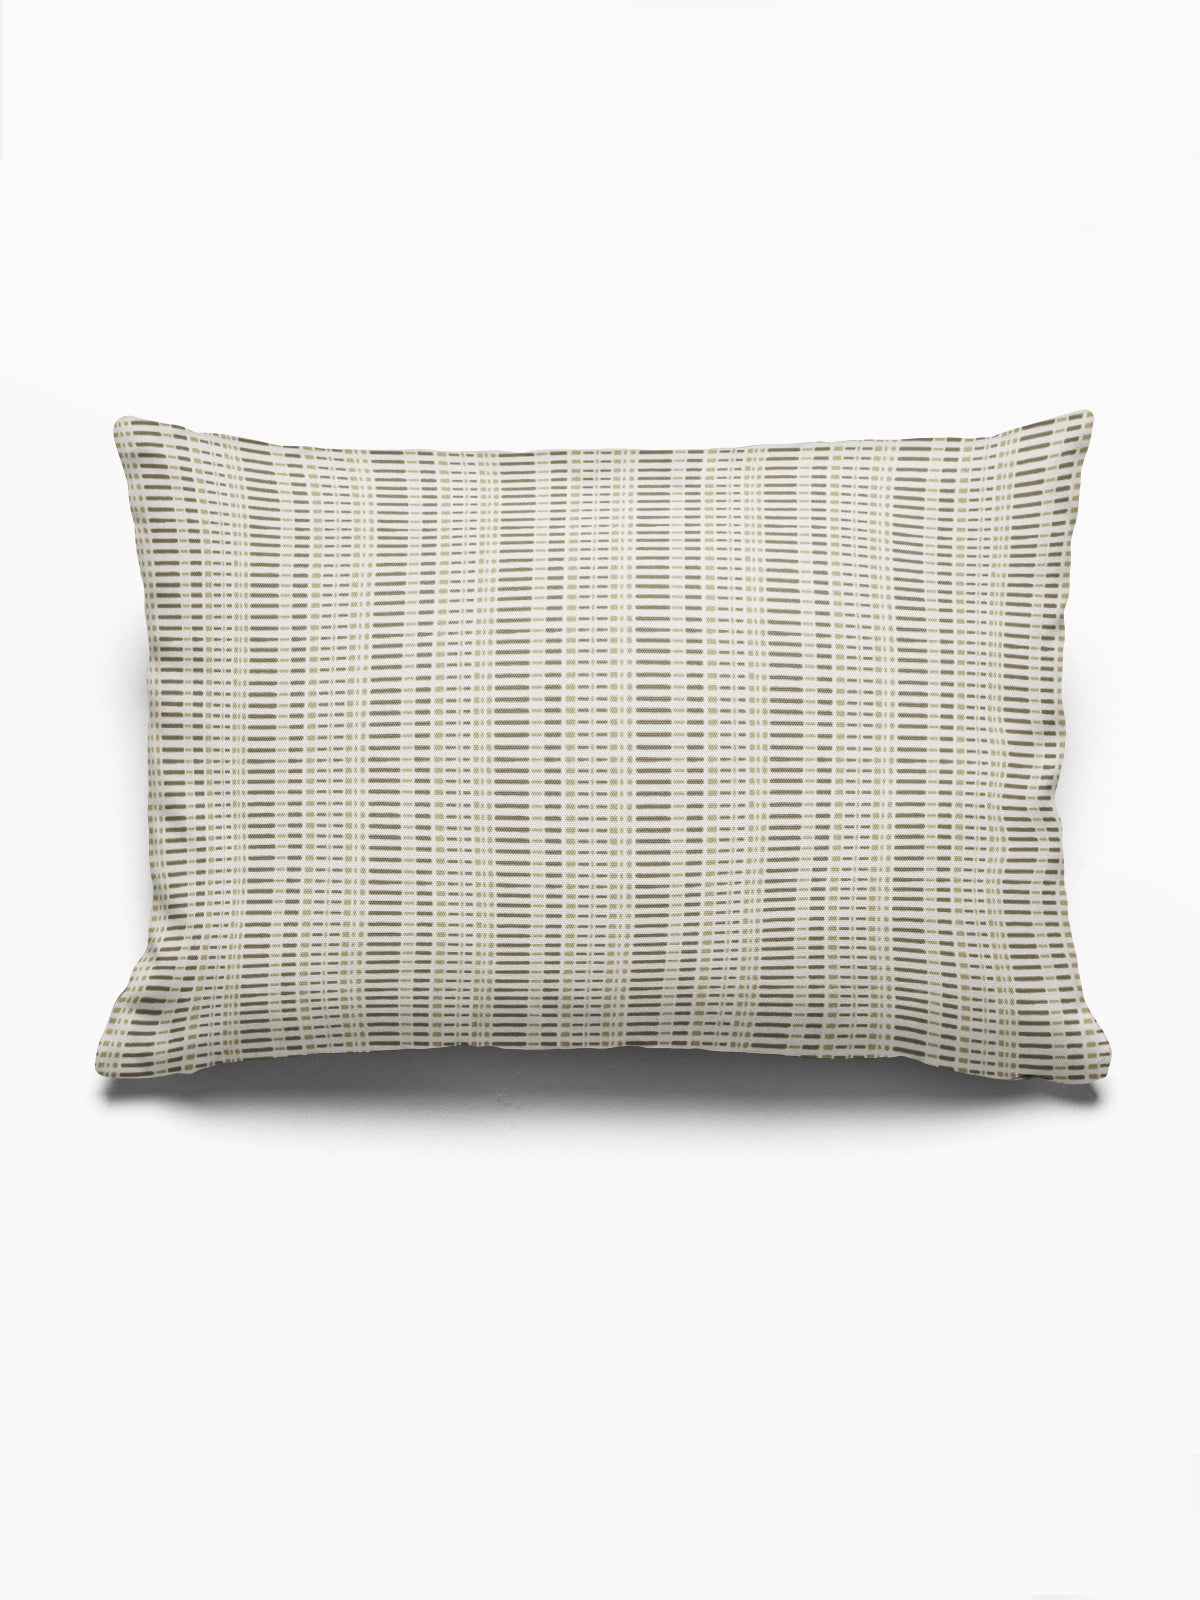 "Birch in Bamboo" Pillow Cover by Emily Daws